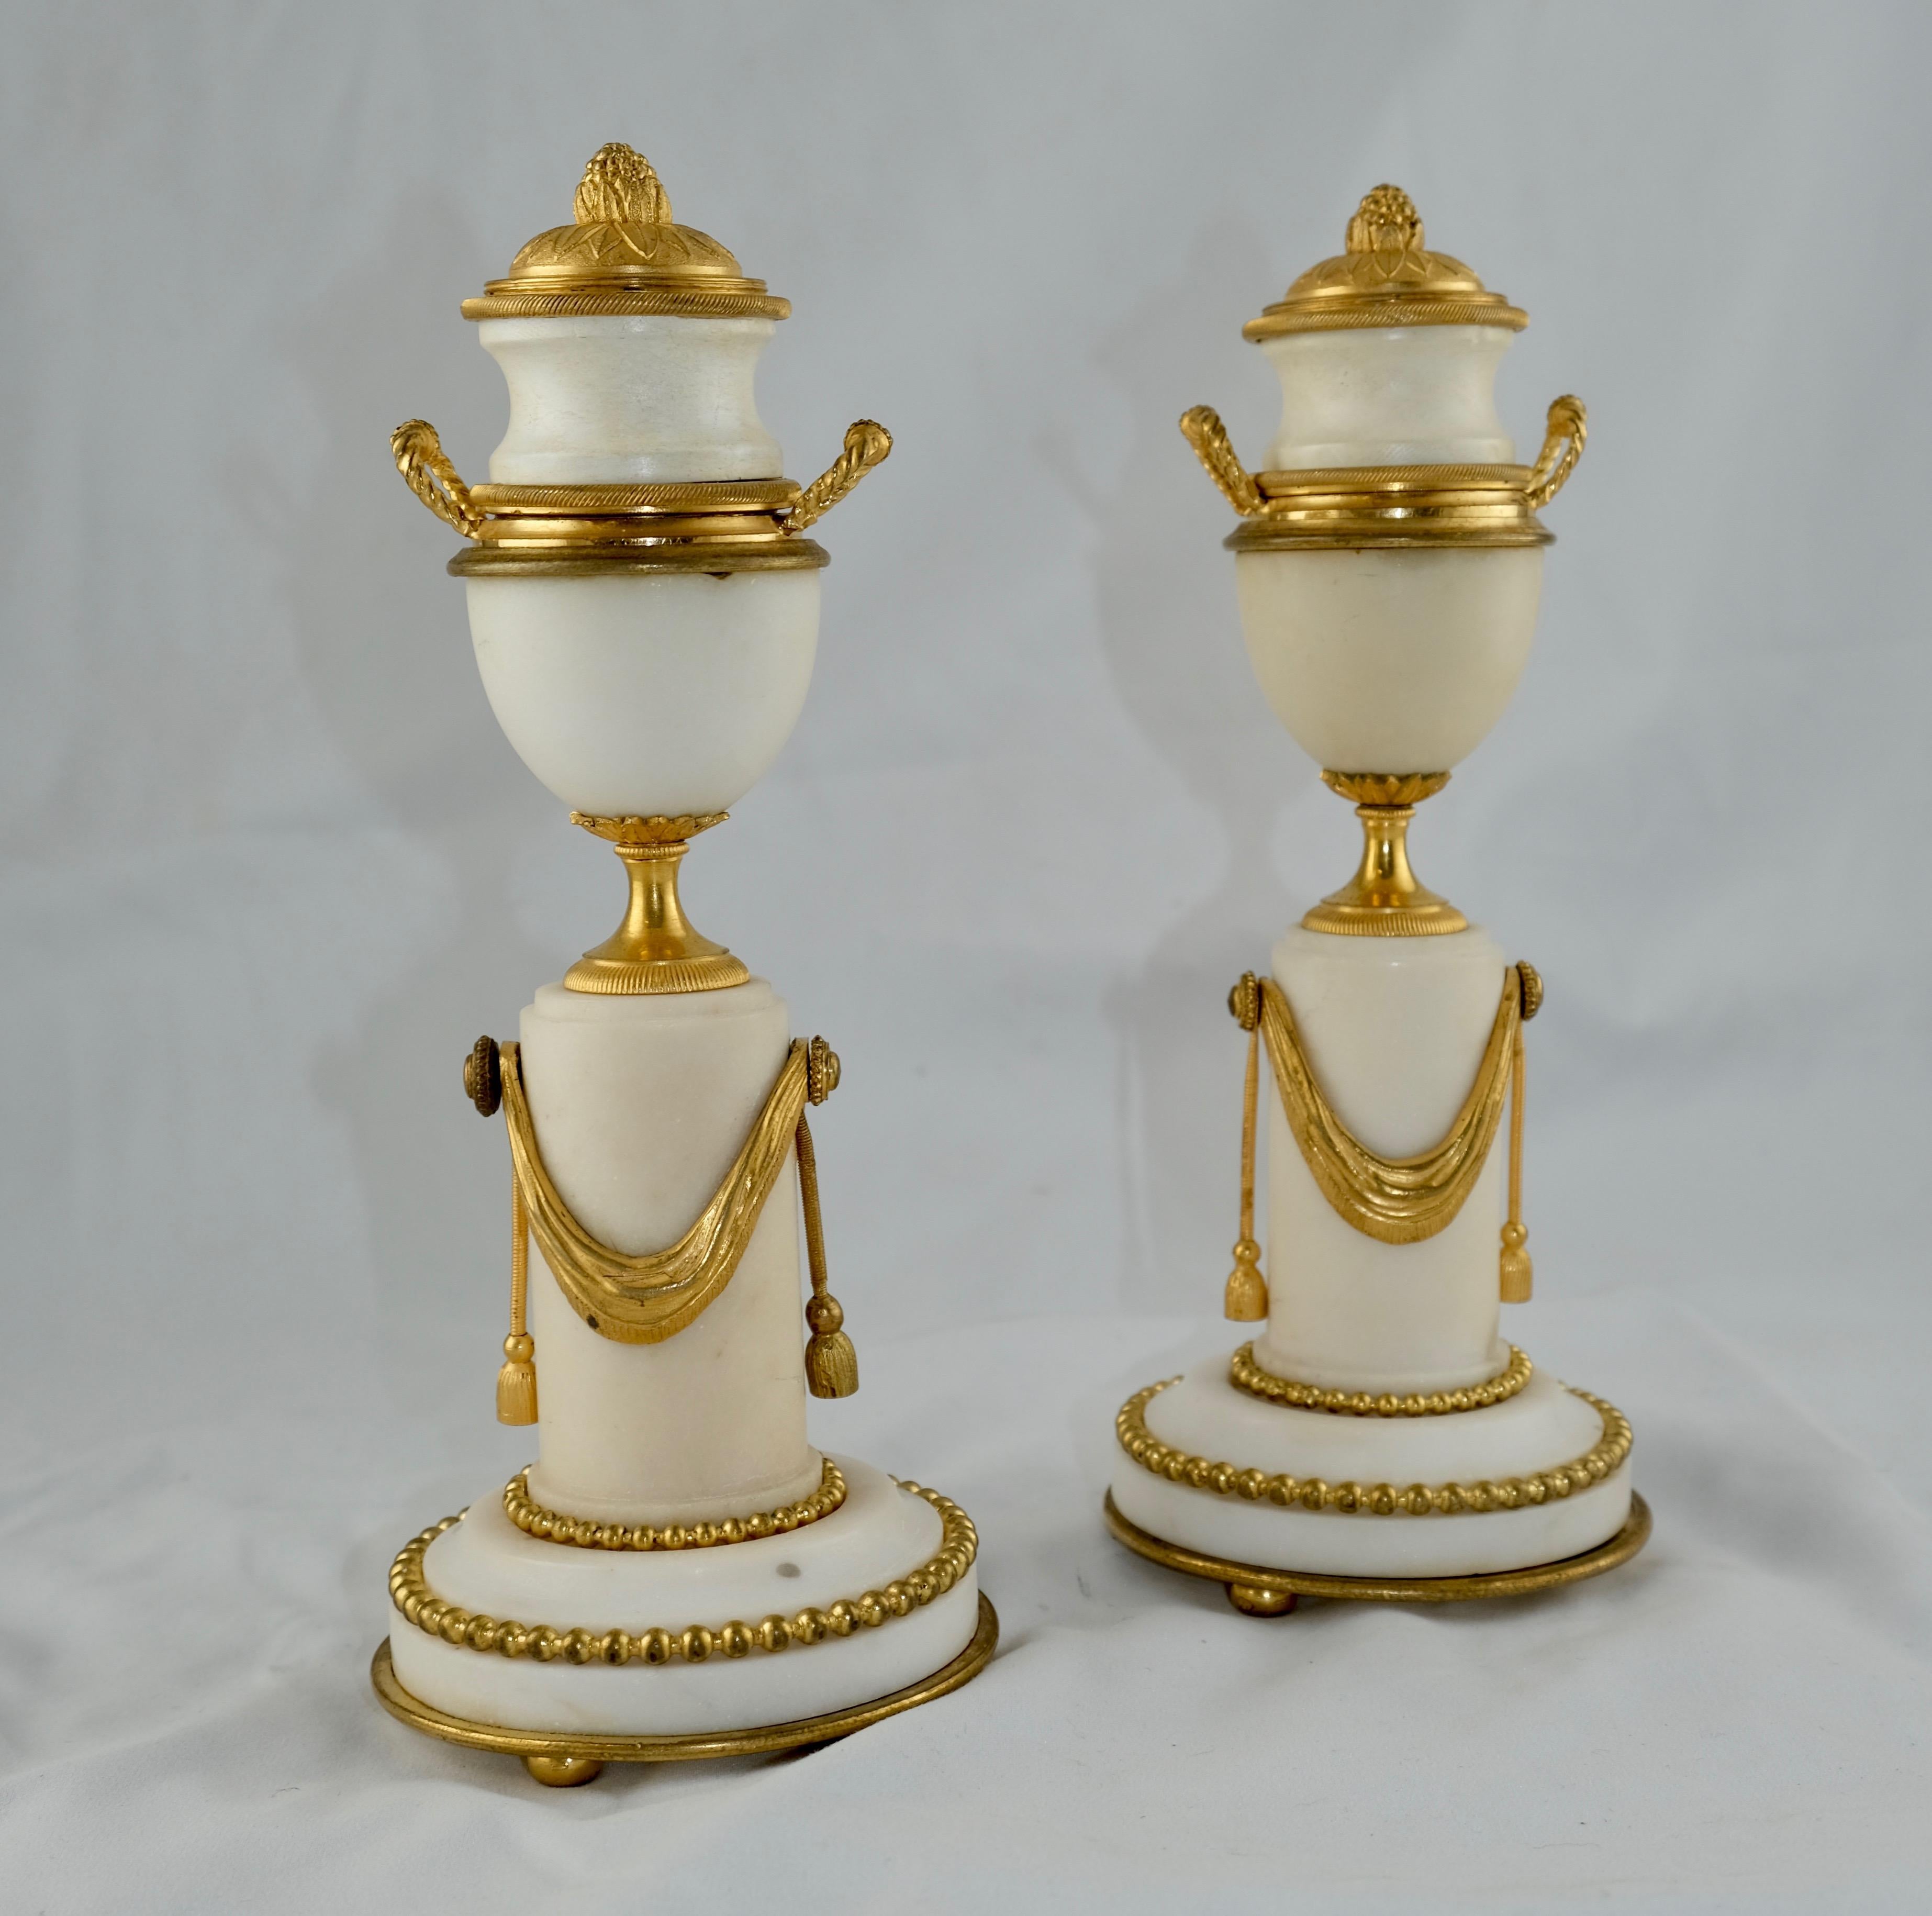 Gilt Pair of Casolettes, Late 18th C